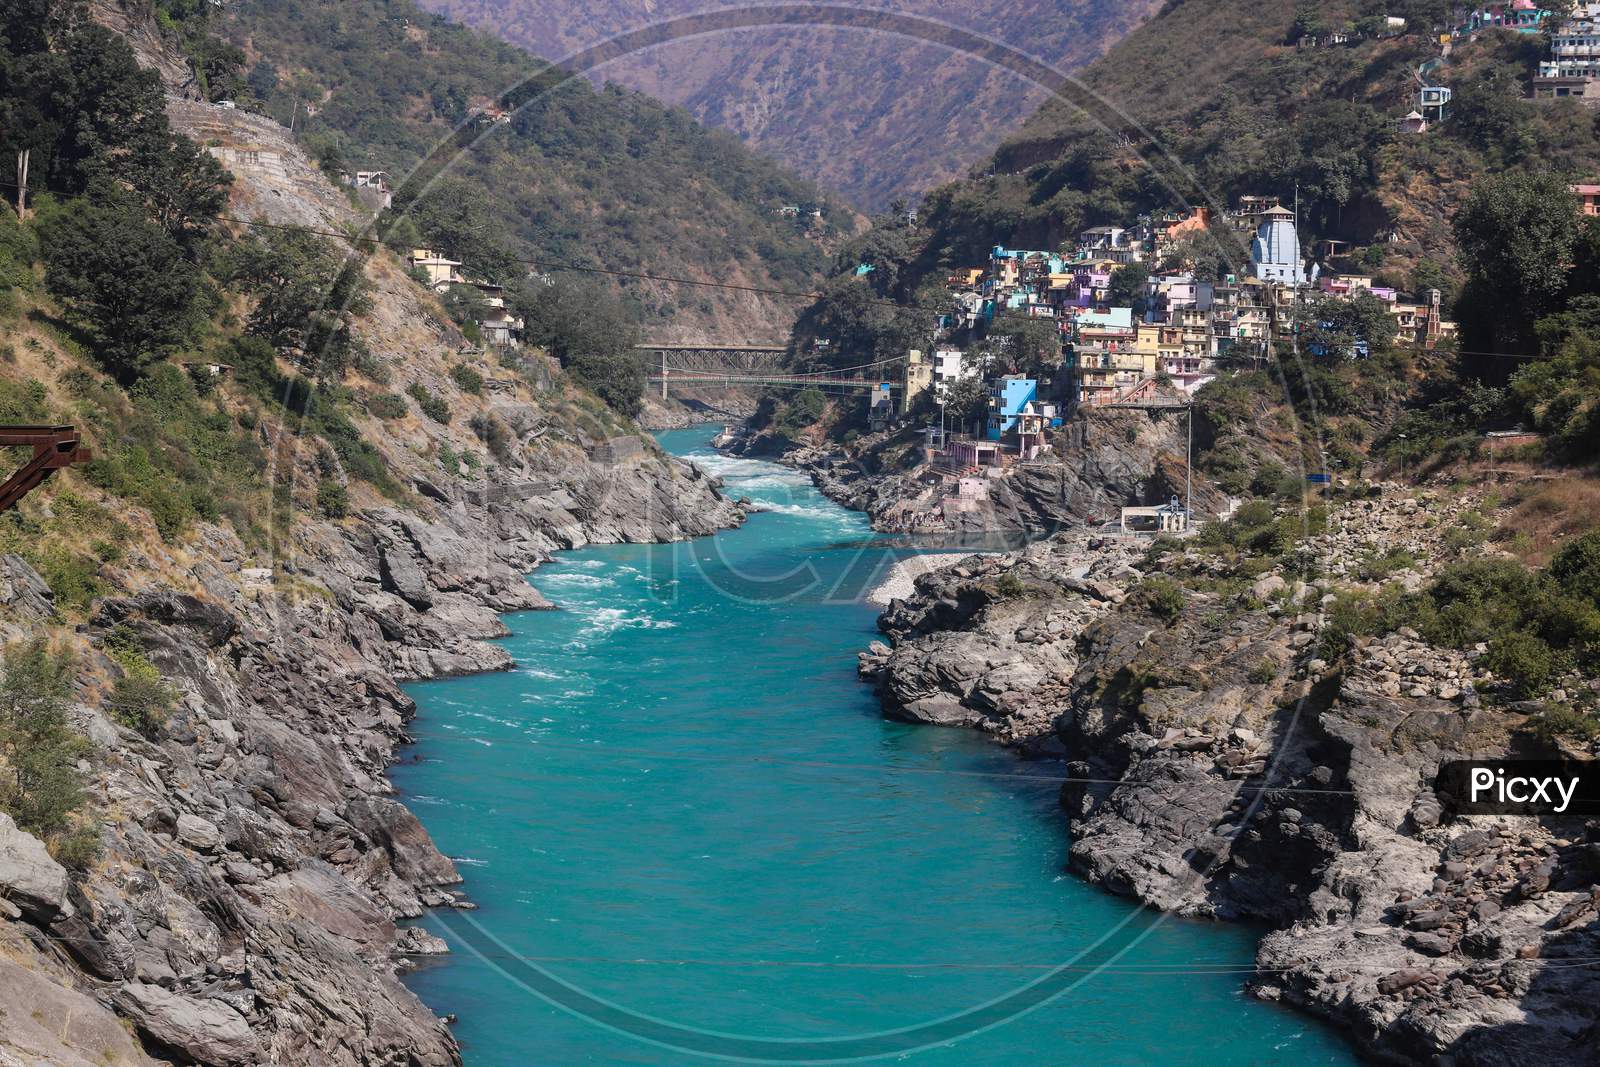 The confluence of Alaknanda and Bhagirathi rivers, which is officially accepted as the start of the River Ganges, in the town of Devprayag, Uttarakhand. For many Hindus, life is incomplete without bathing in it at least once in their lifetime, washing away their sins.